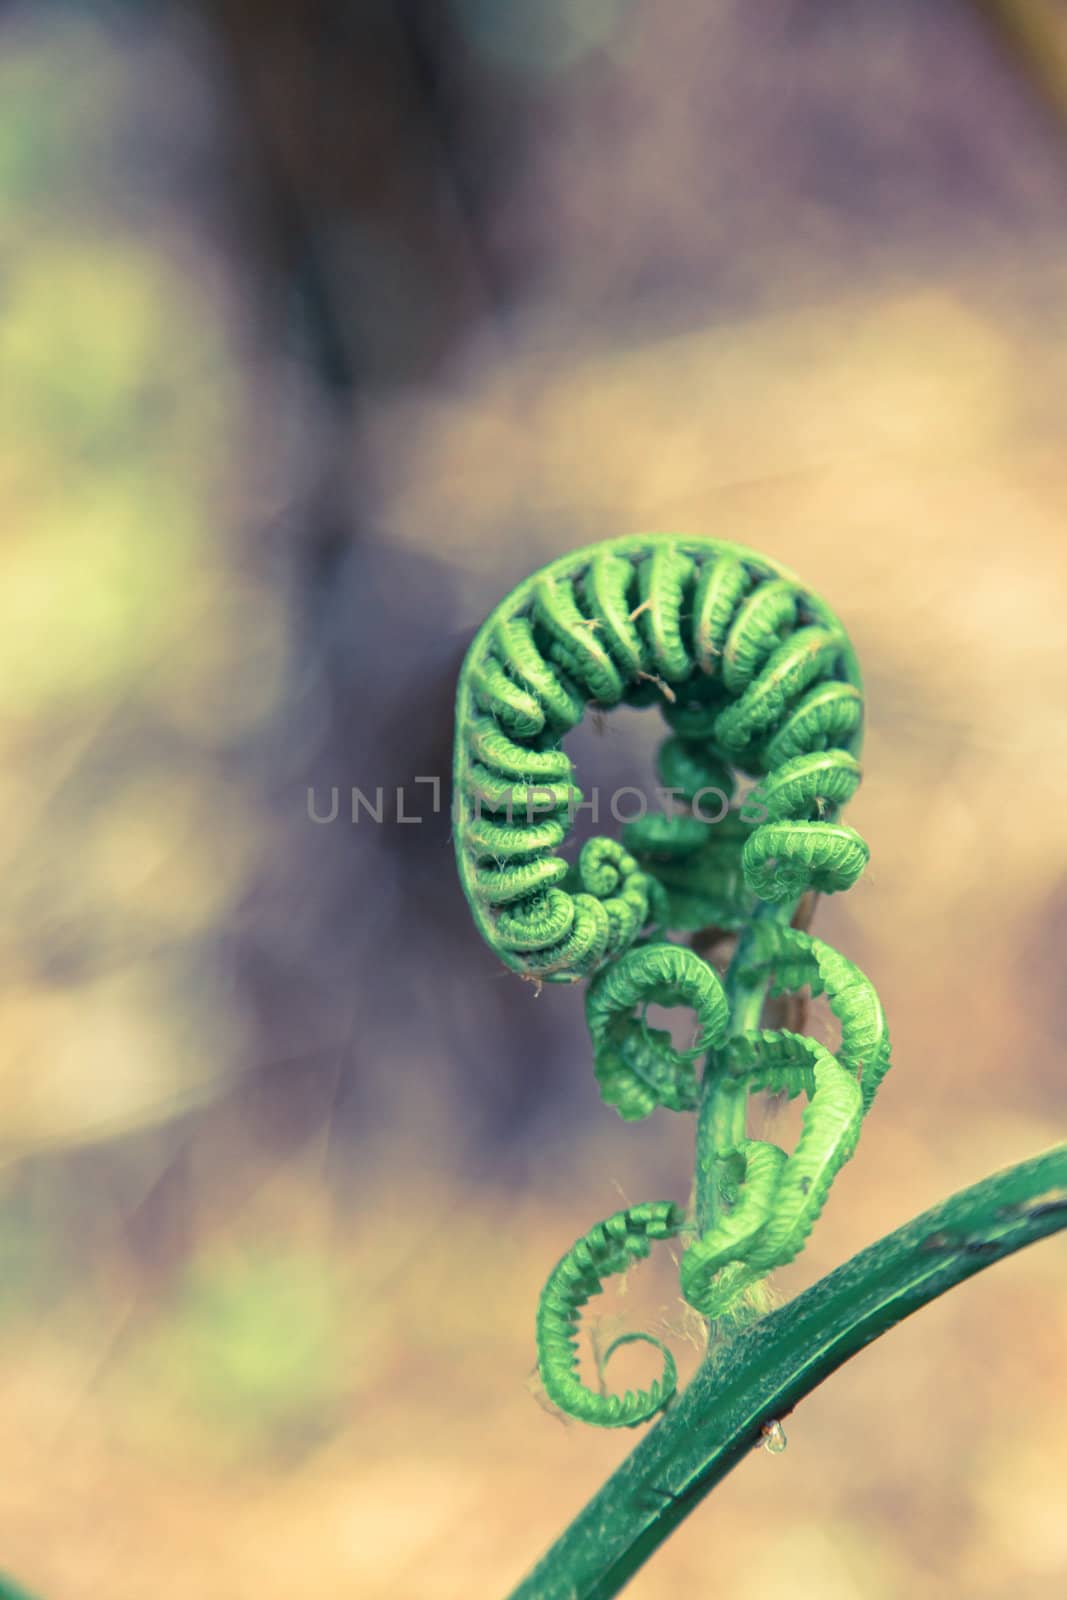 A young fern about to expand and grow